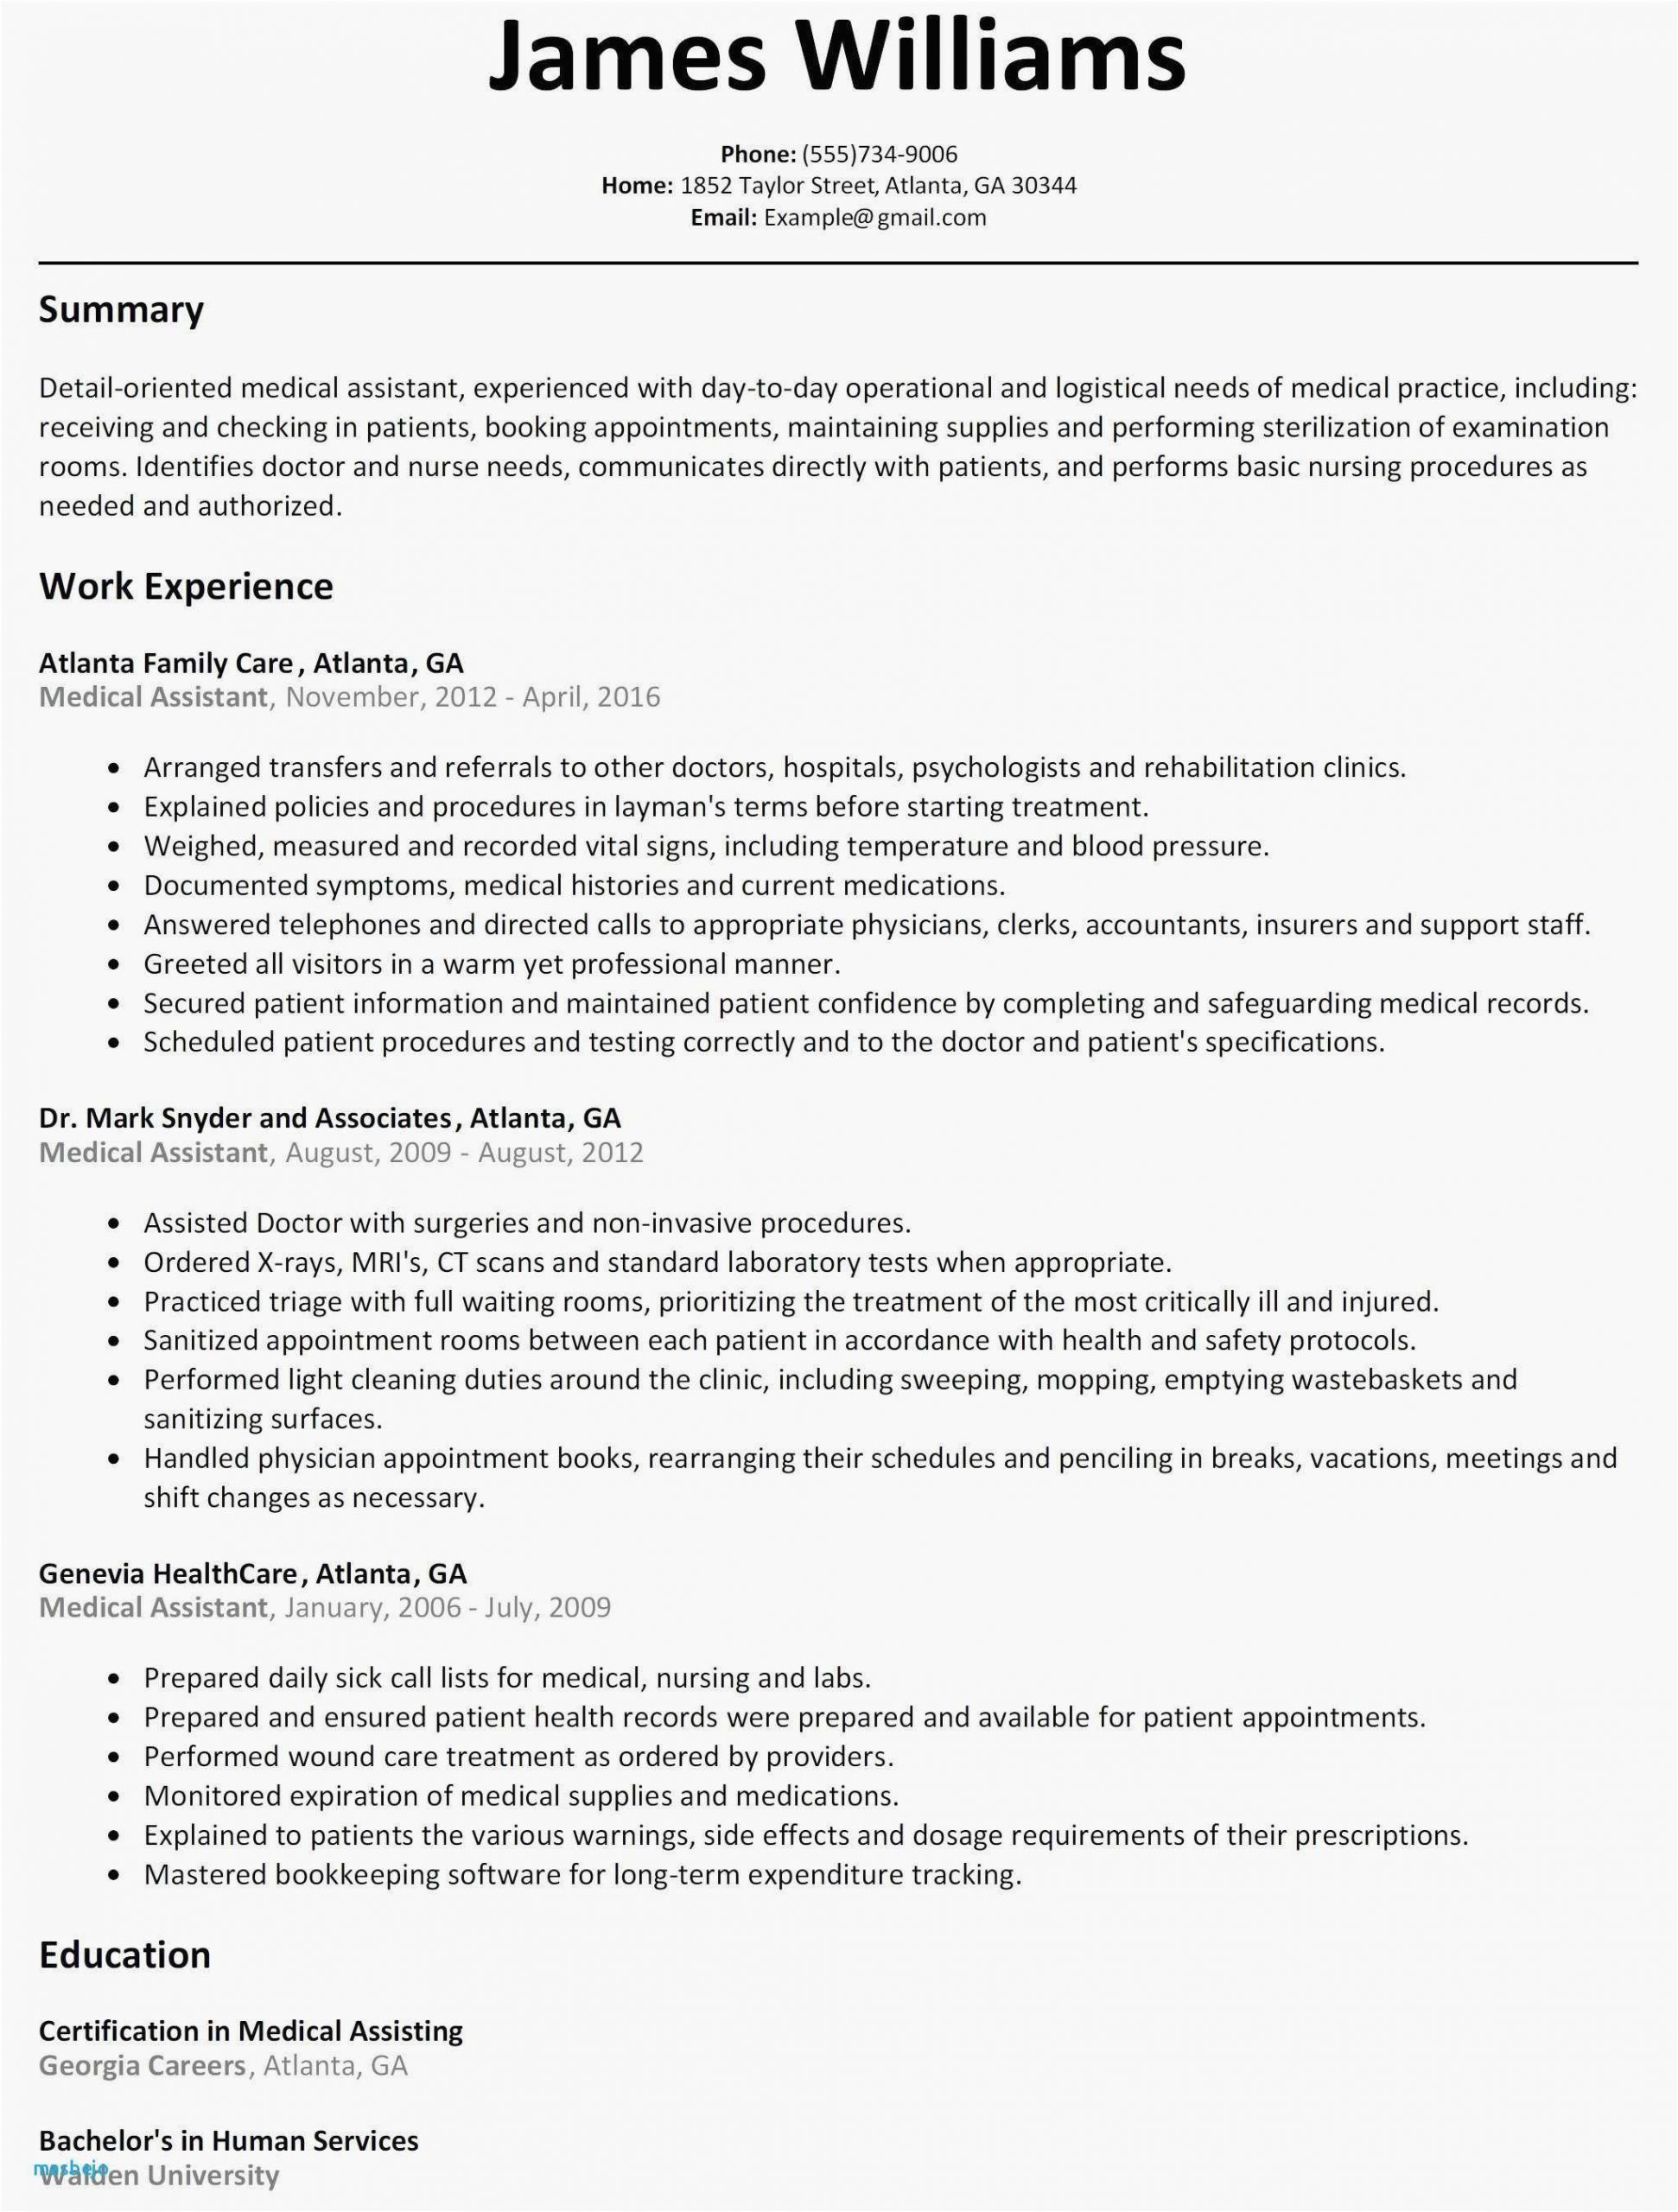 Sample Resume Objective Statements for College Students Free 50 College Grad Resume Free